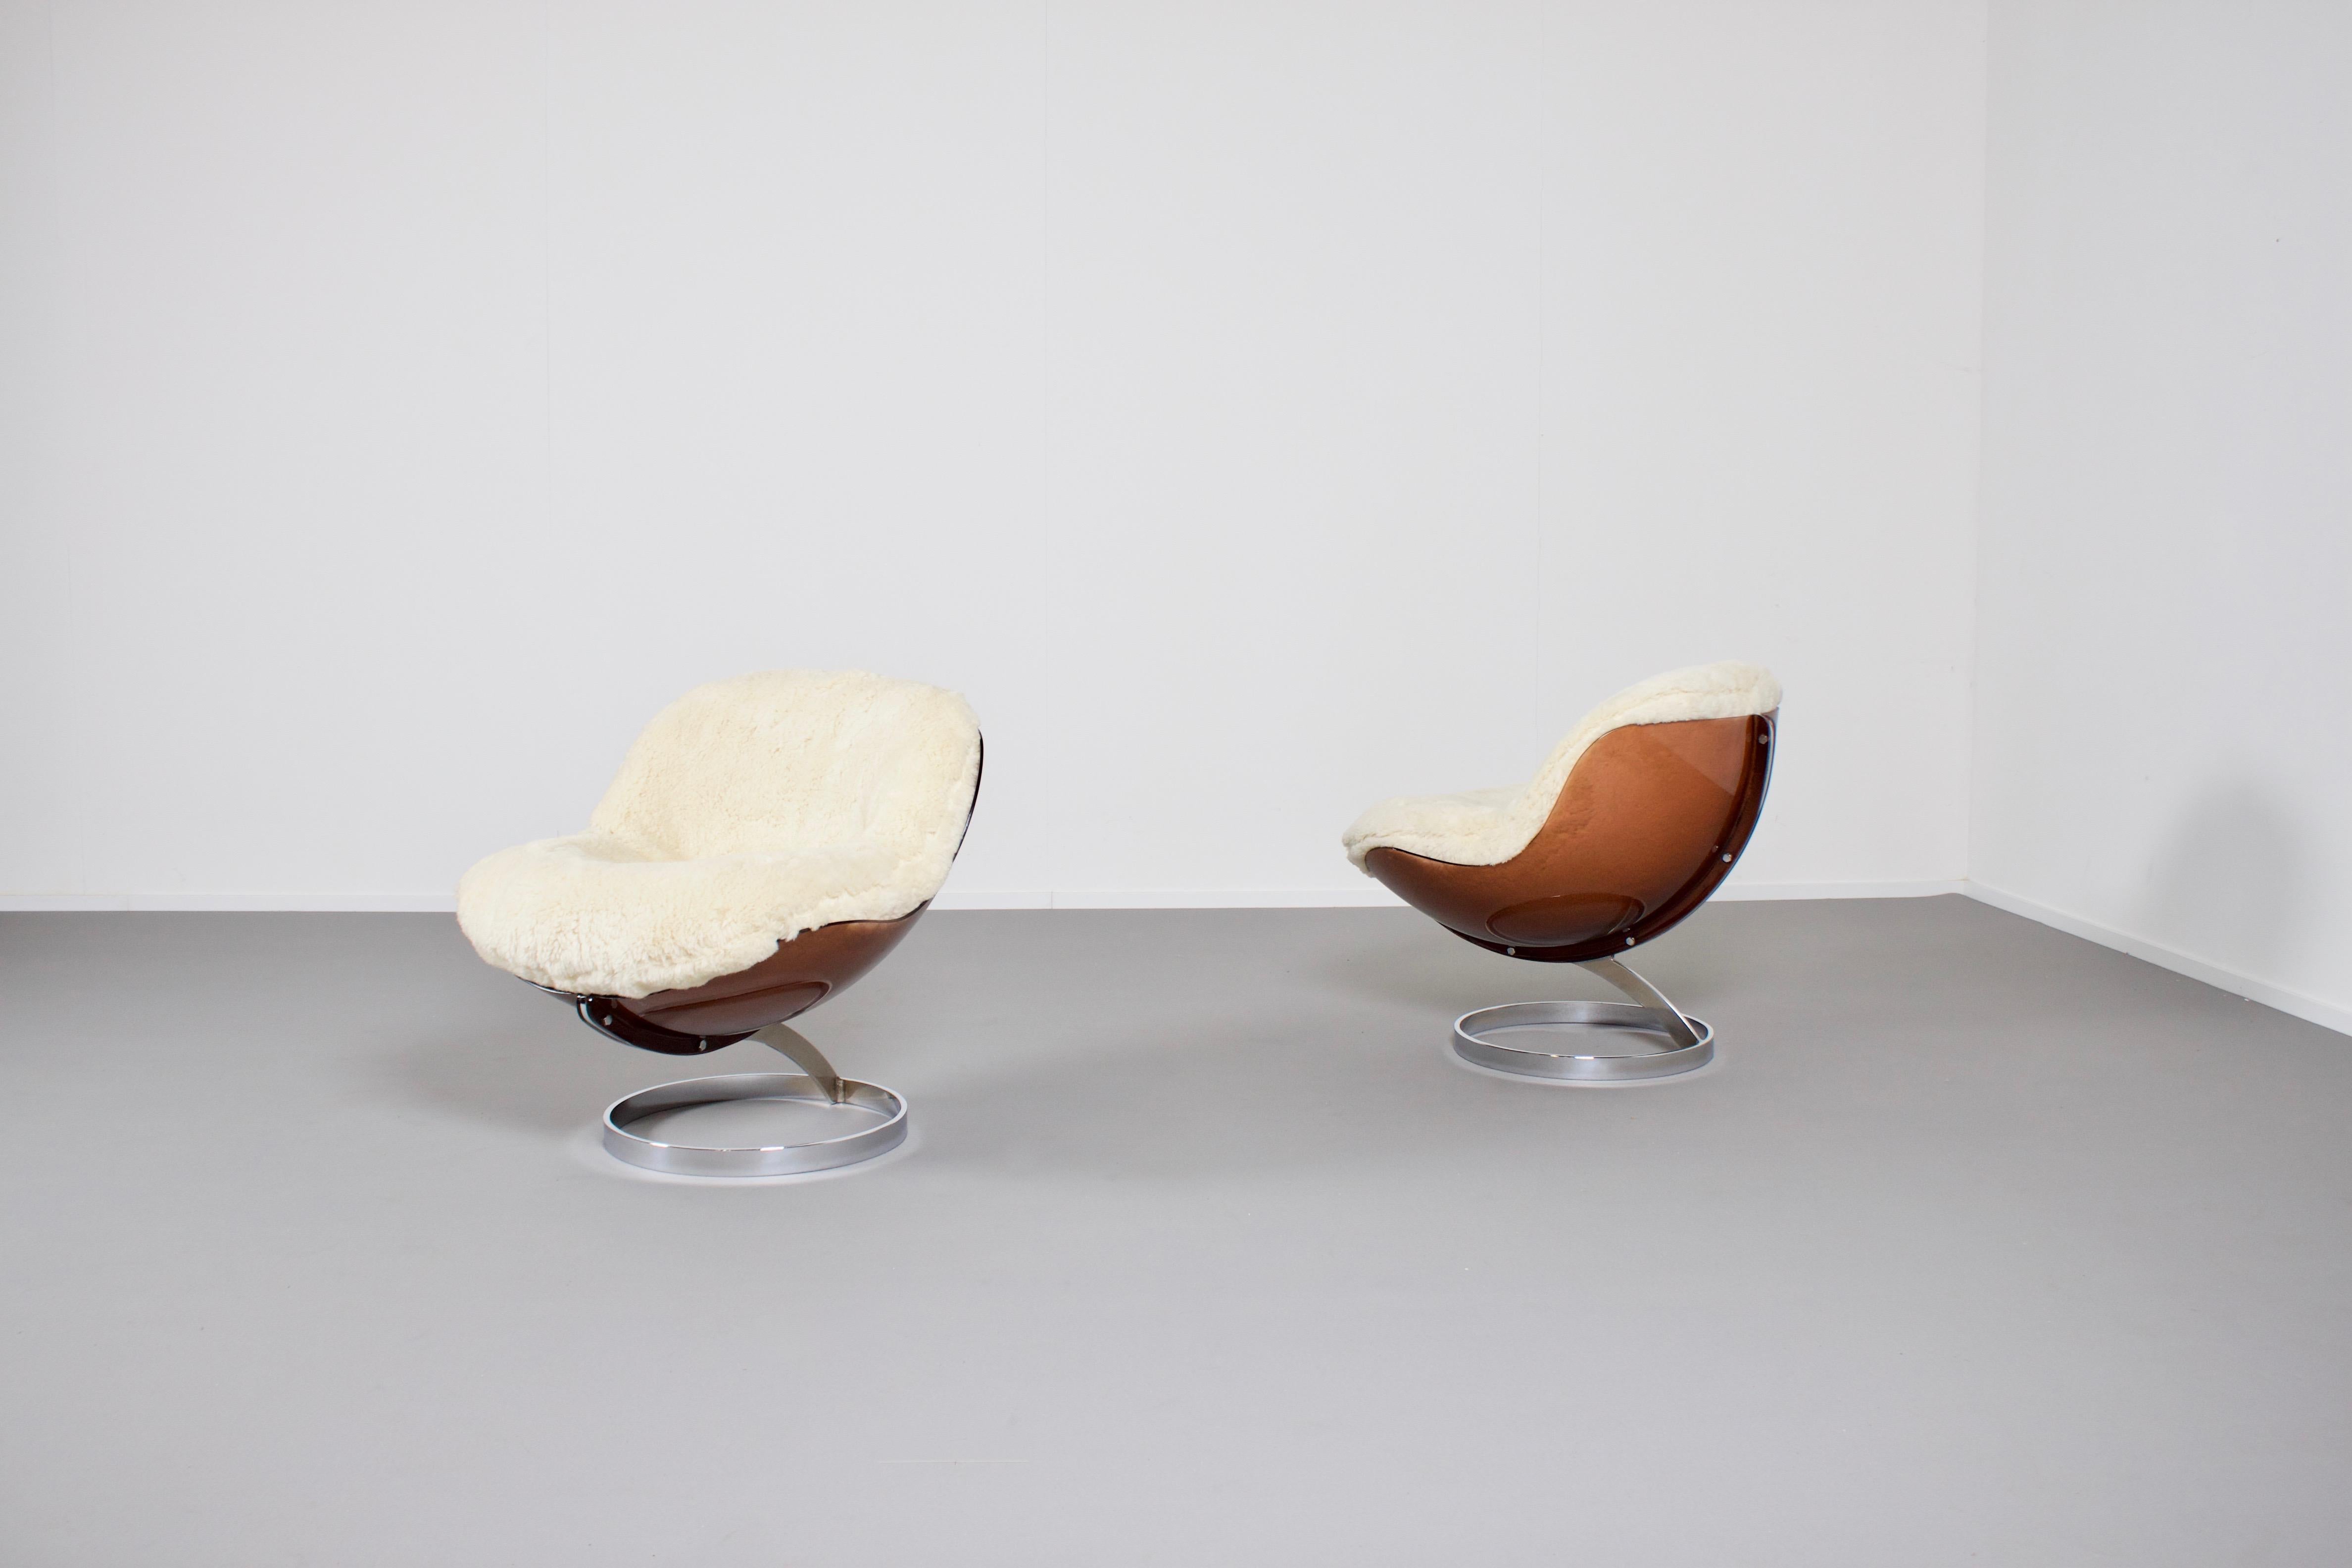 Set of beautiful and rare ’Sphere’ lounge chairs in very good condition.

Designed by Boris Tabacoff in 1971

Manufactured by the French MMM. factory (Mobilier Modular Moderne)

These chairs have a characteristic brown lucite shell which holds